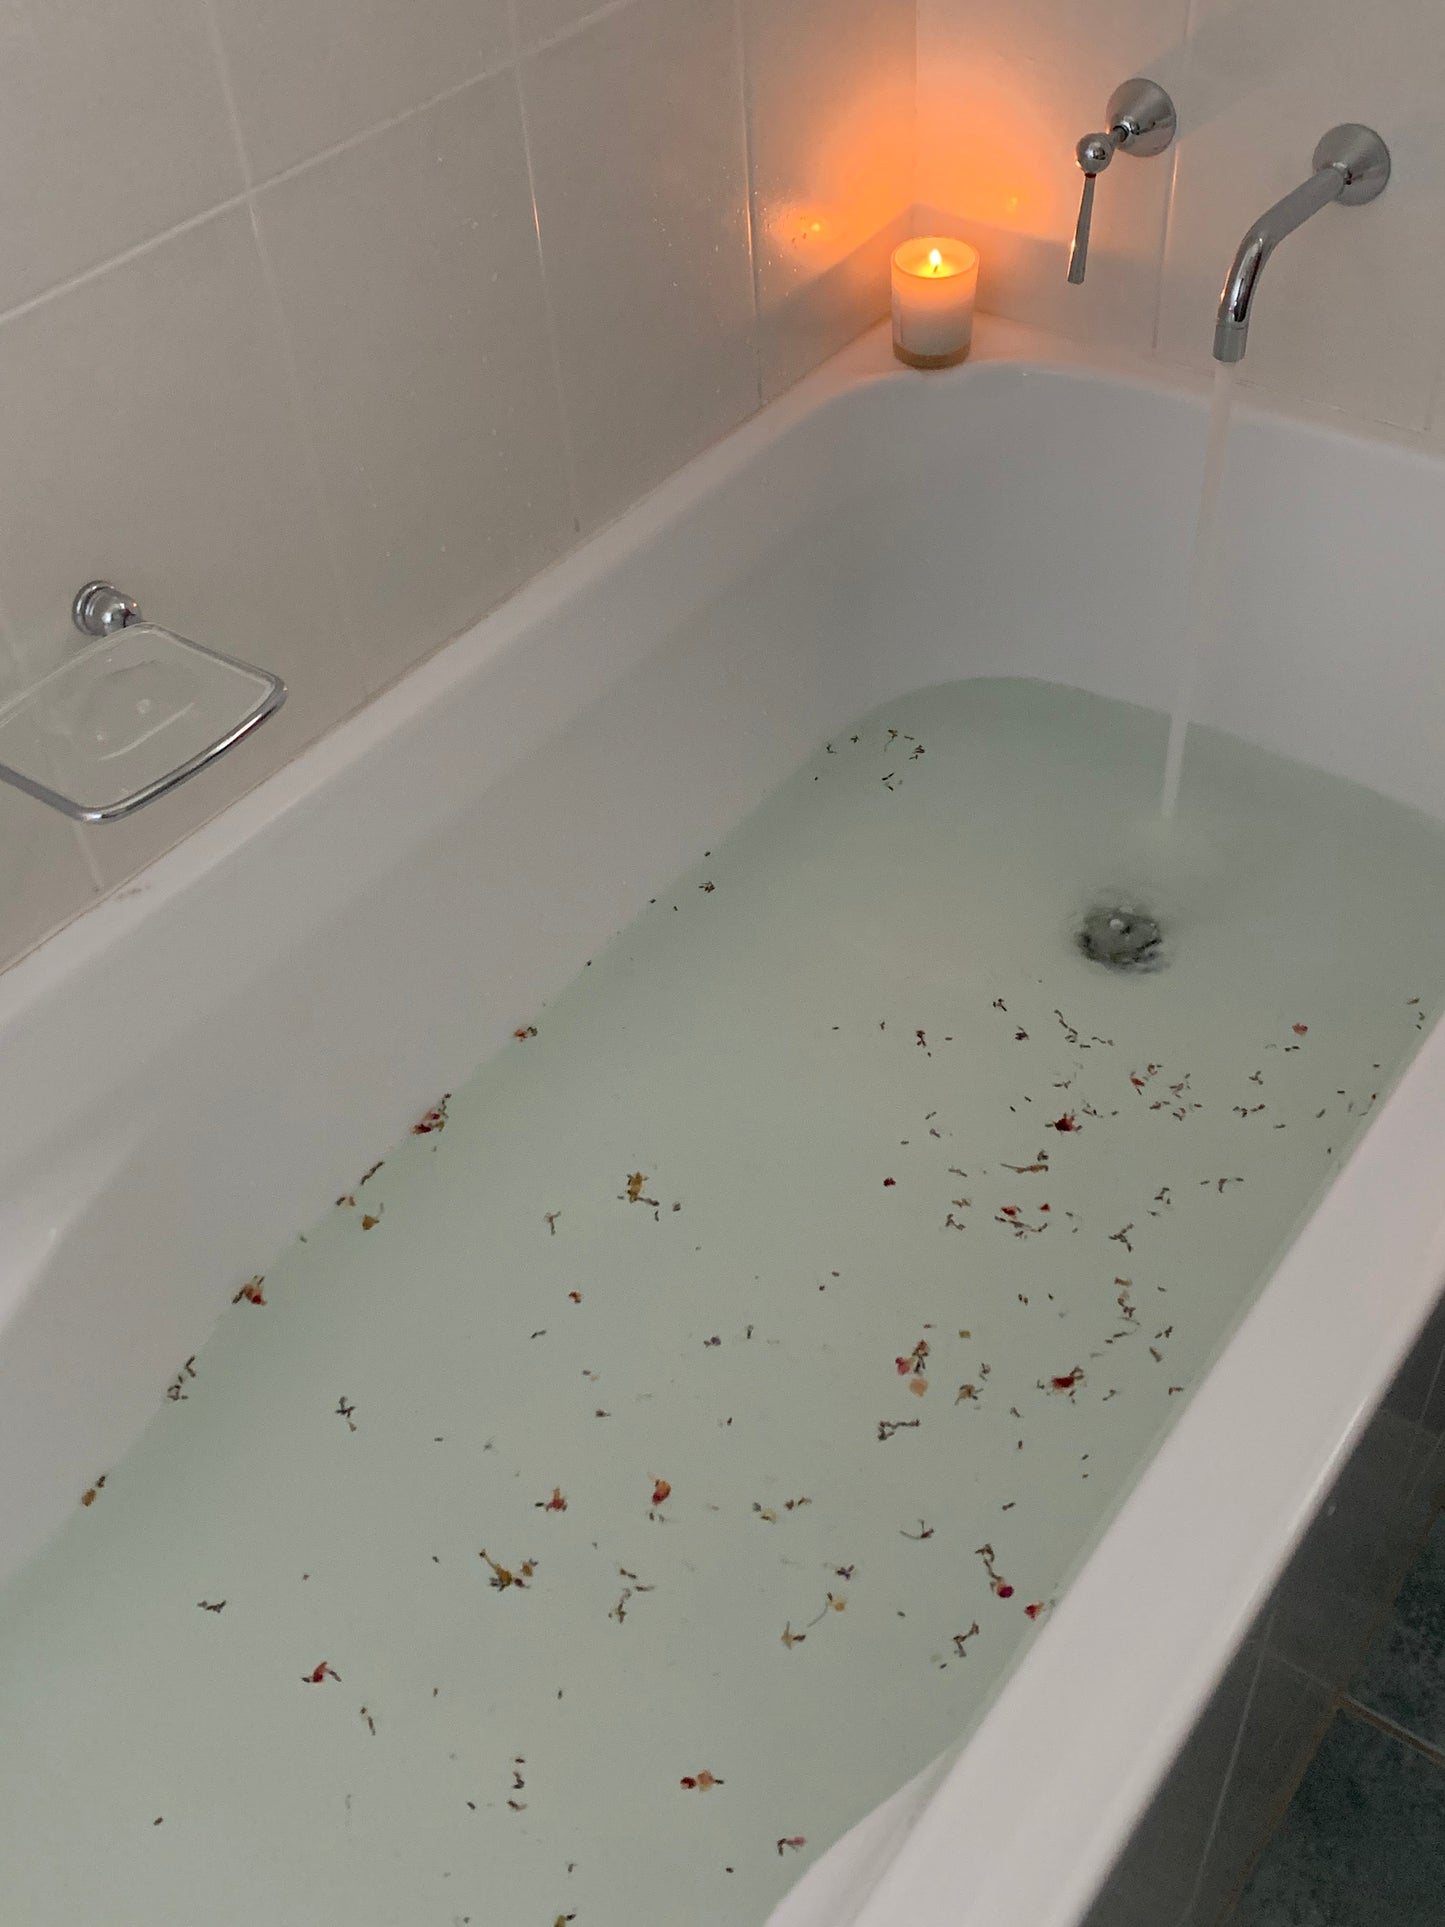 Bath being filled with water with "relax" bath salts in the bath.